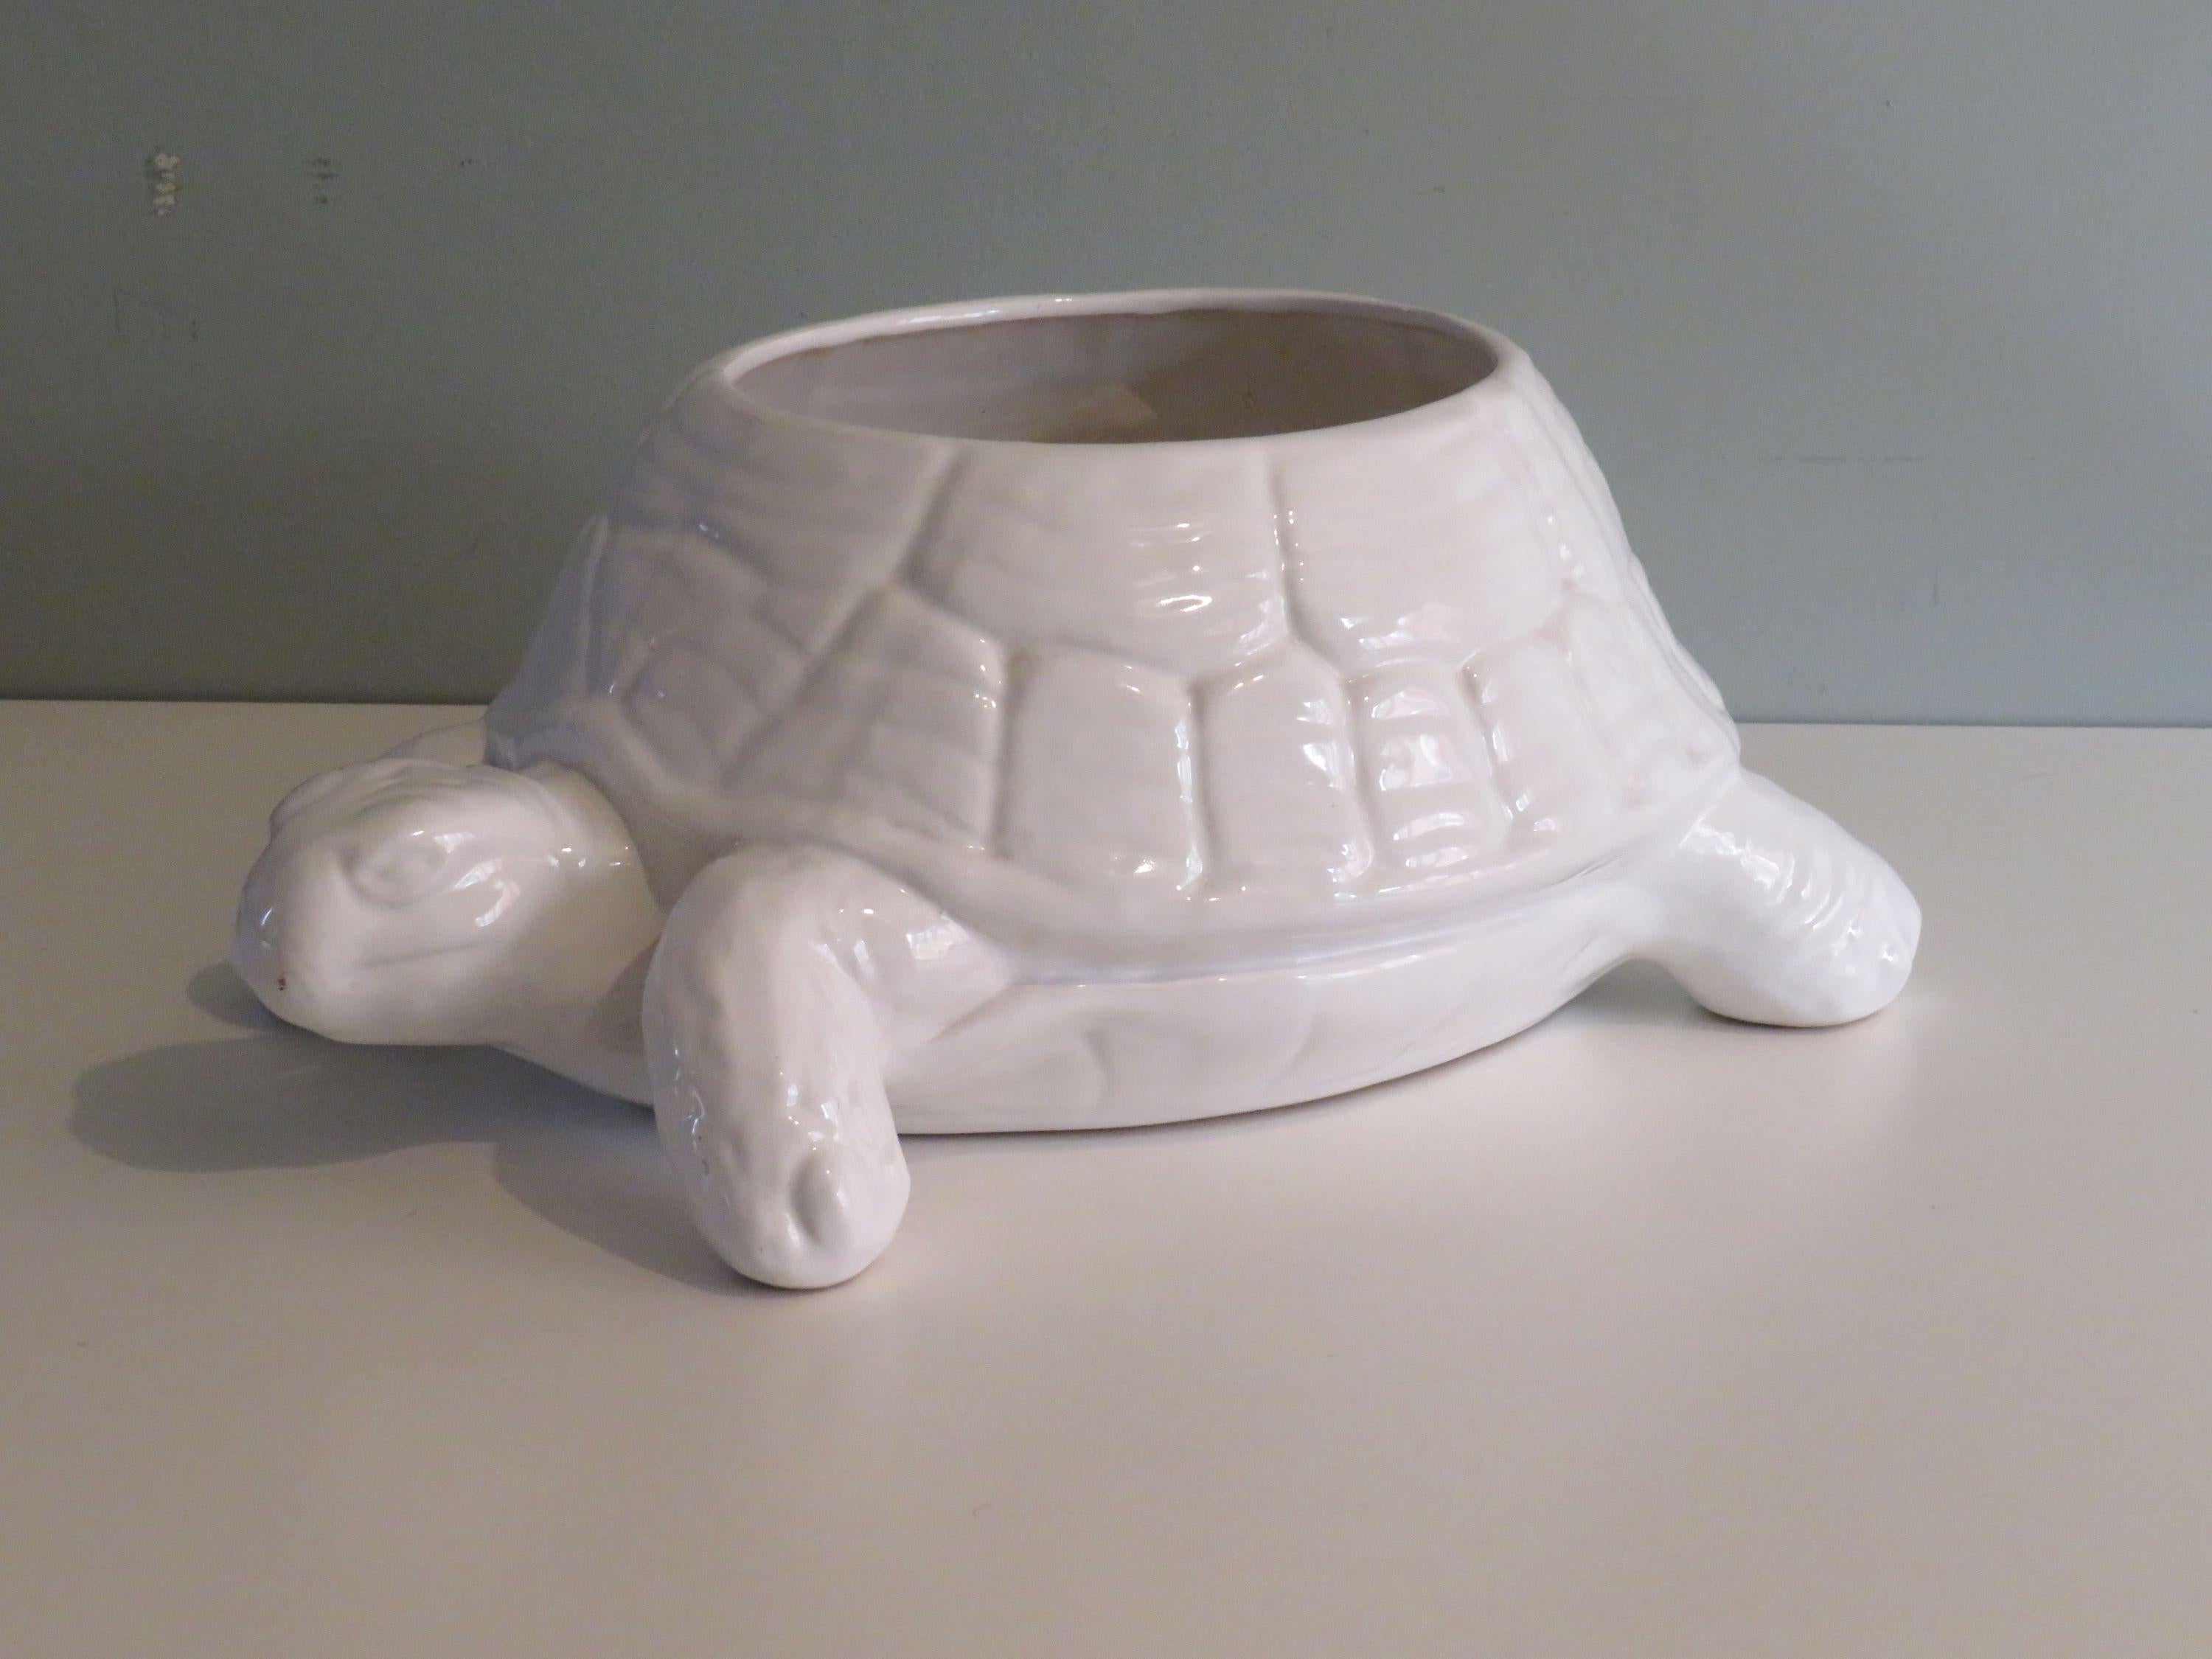 Glazed planter in the shape of a turtle and in the style of Bassano.
The dimensions to use an inner pot are: height 14.5 cm, width 15 cm and length 18 cm.
The item is in good condition, there are very light traces of use.